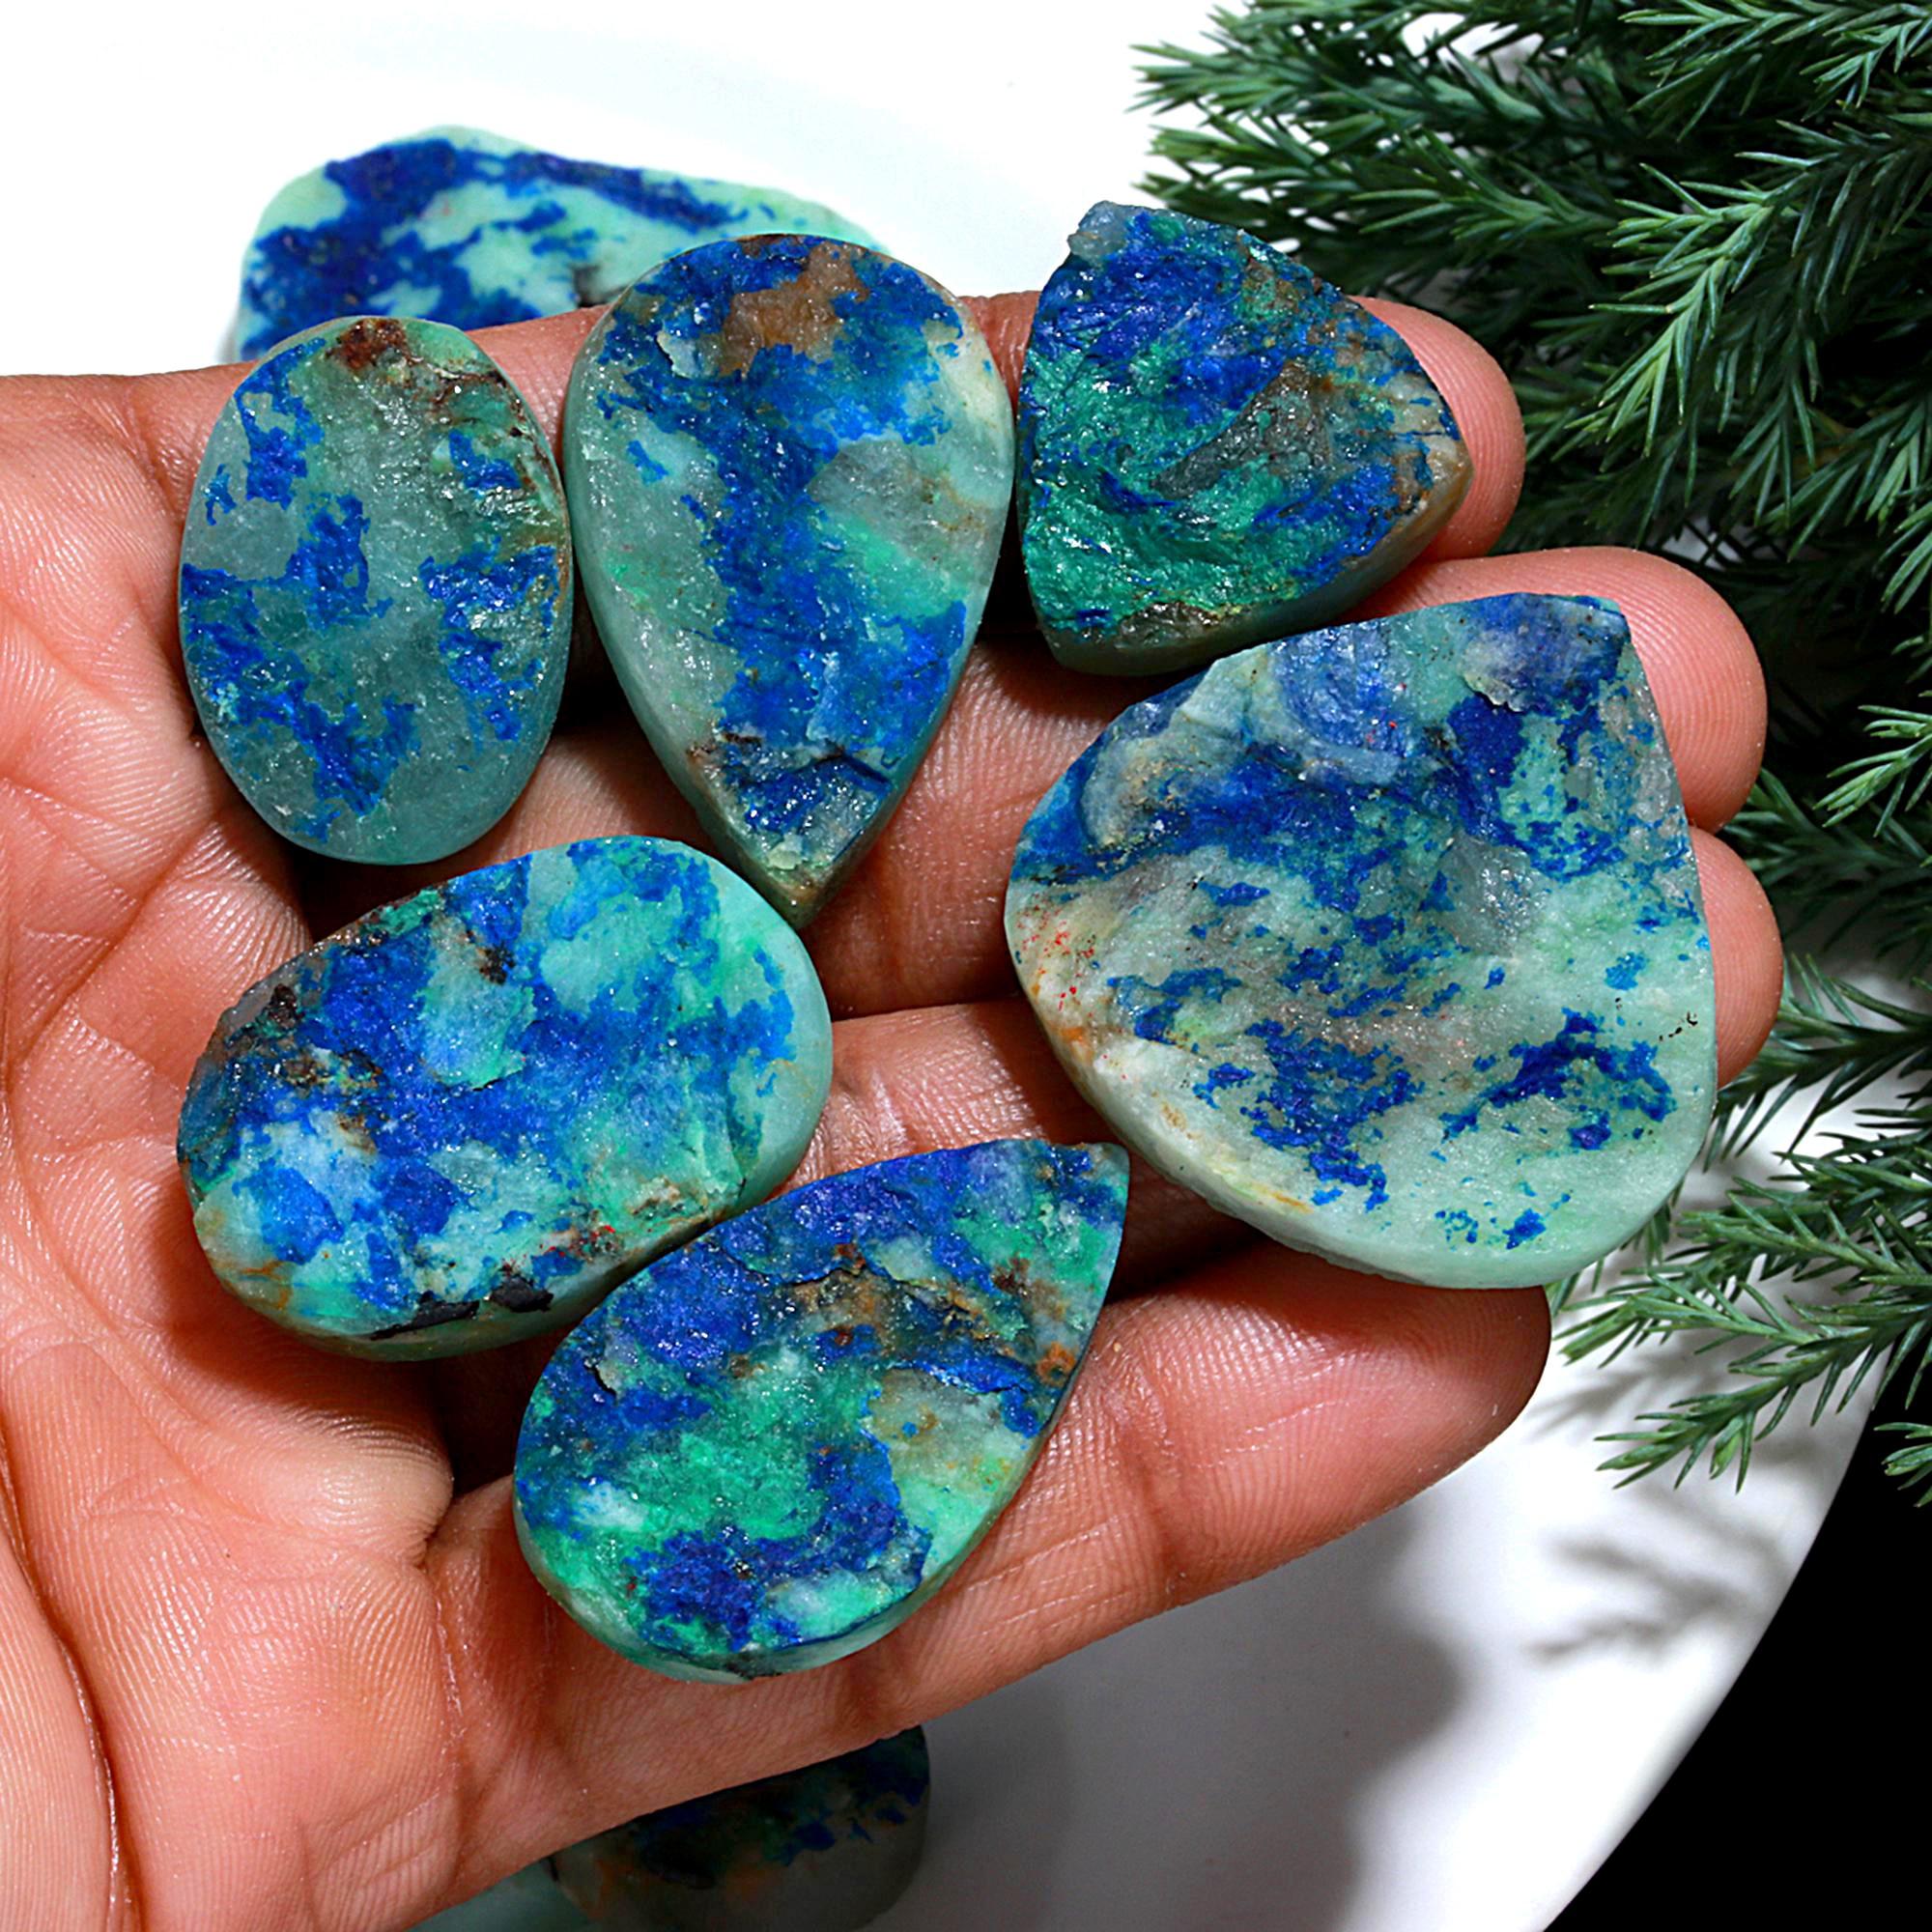 19 Pcs 600.Cts Natural Azurite Druzy Unpolished Loose Cabochon Gemstone For Jewelry Wholesale Lot Size 41x25 19x20mm